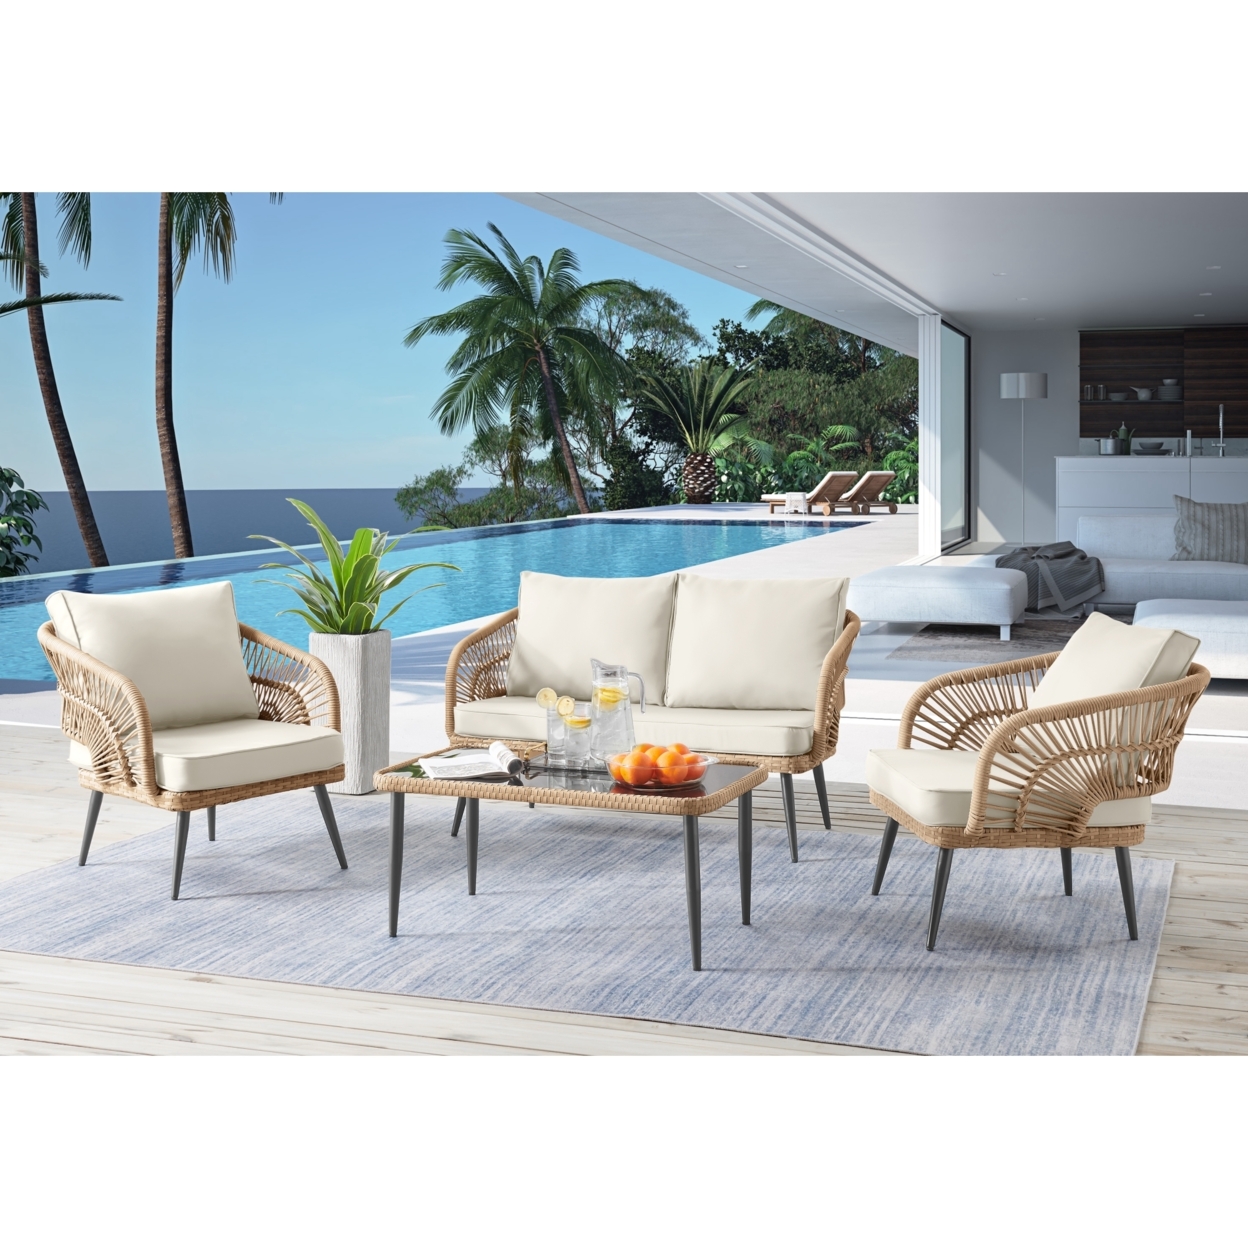 Javien Outdoor Set -All-Weather Faux Rattan Wicker Design, Removable And Washable Cushions - Sand/4 Seating